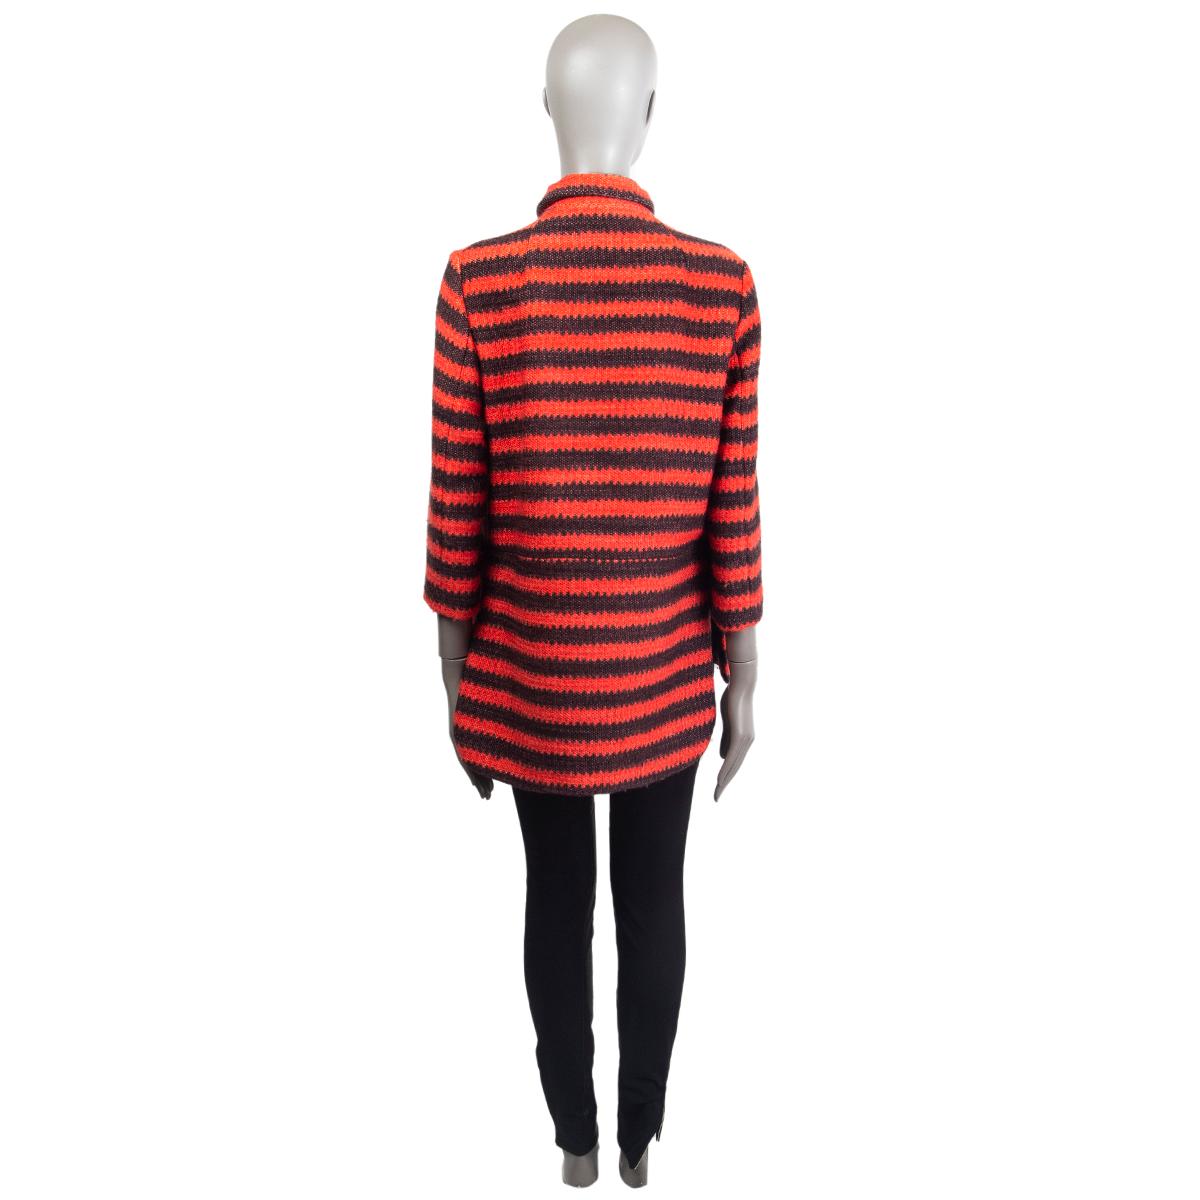 MARNI black & coral wool STRIPED 3/4 SLEEVE KNIT Peacoat Coat Jacket 40 S In Excellent Condition For Sale In Zürich, CH